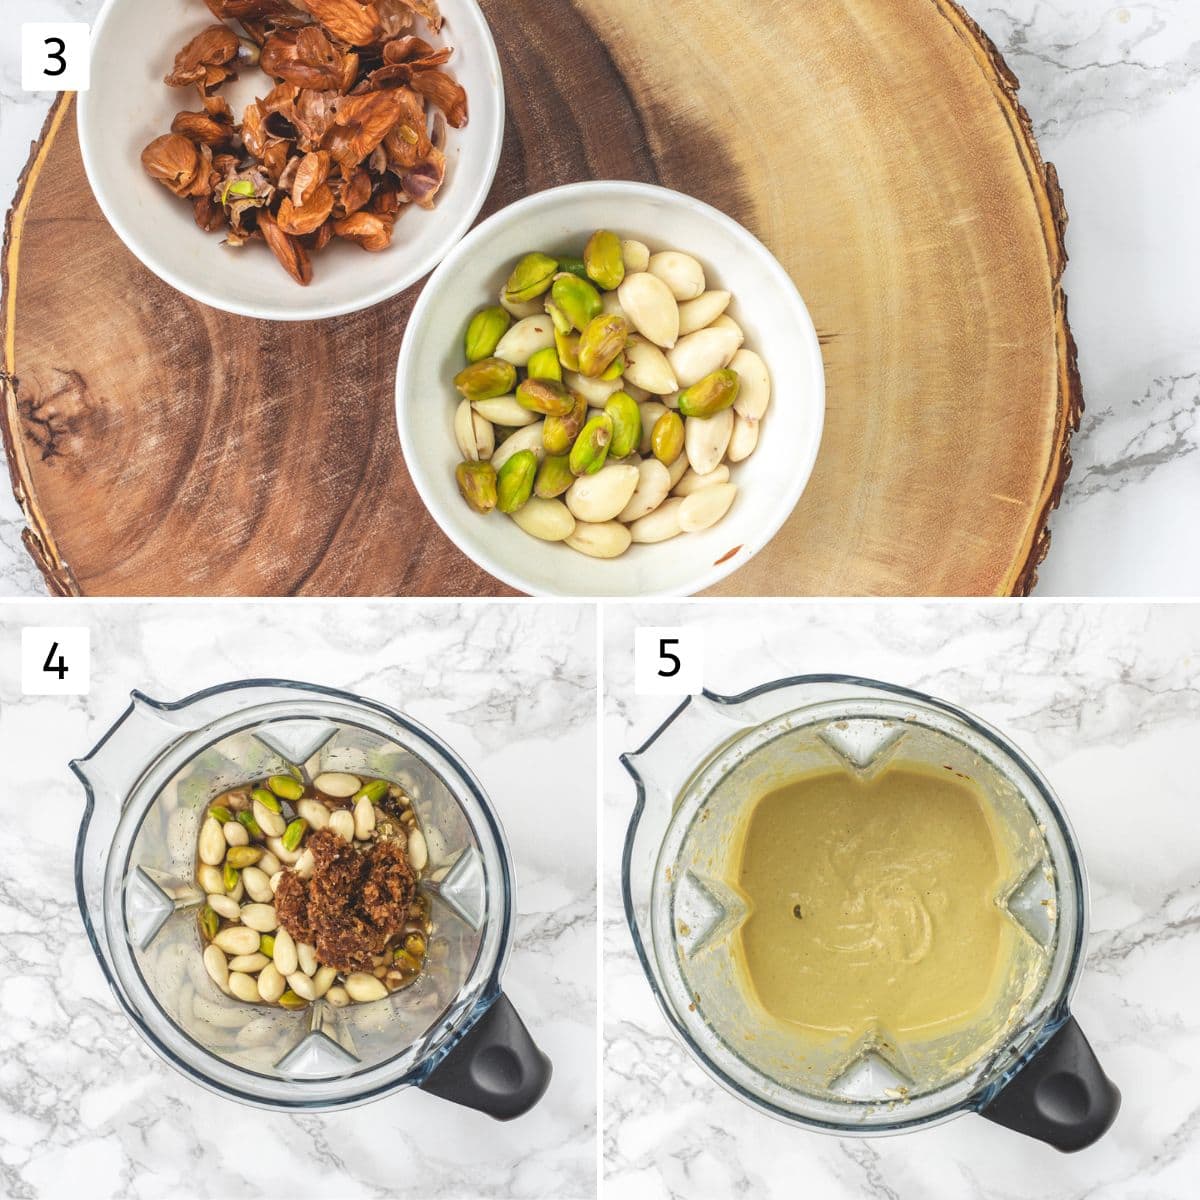 Collage of 3 steps showing peeling almonds, pistachios and grinding into paste.